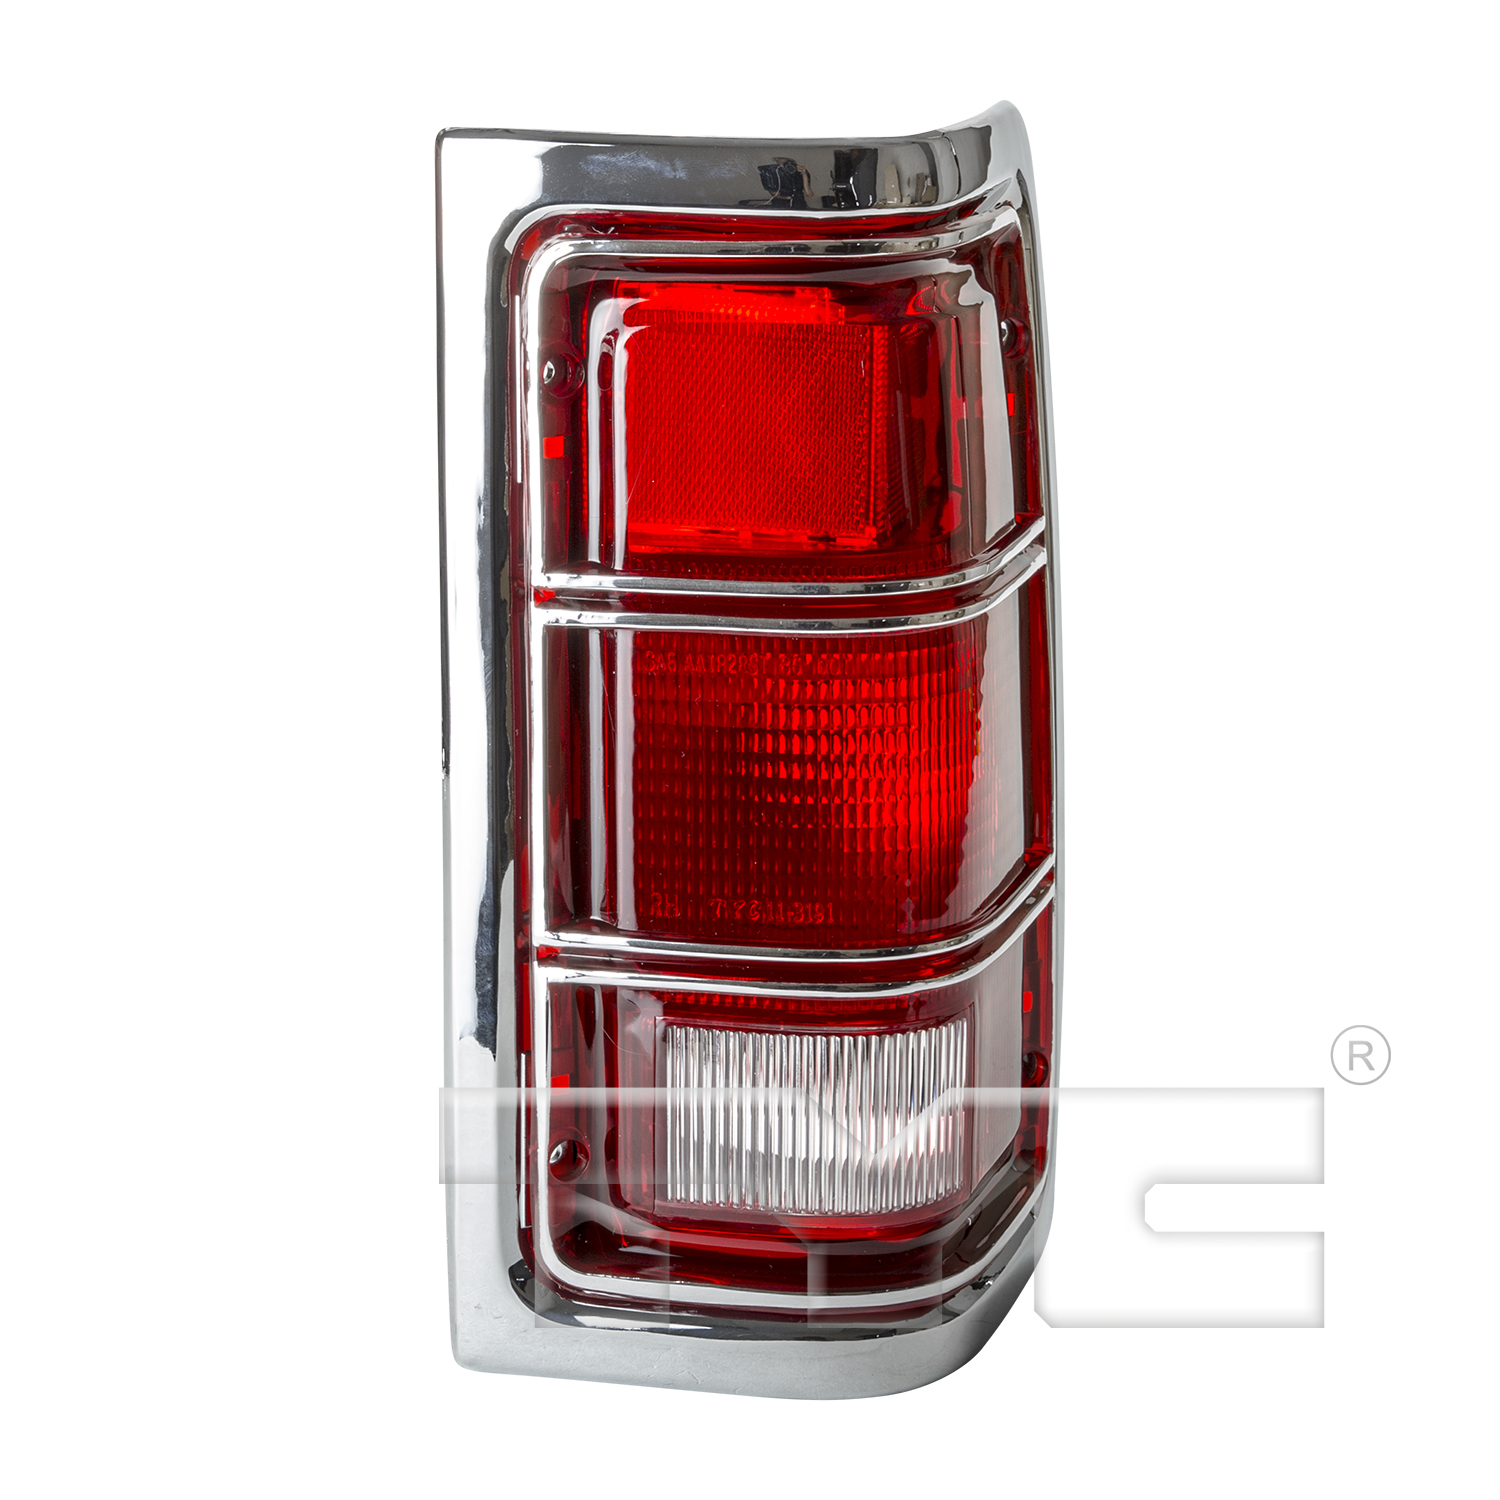 Aftermarket TAILLIGHTS for DODGE - D100, D100,84-87,RT Taillamp lens